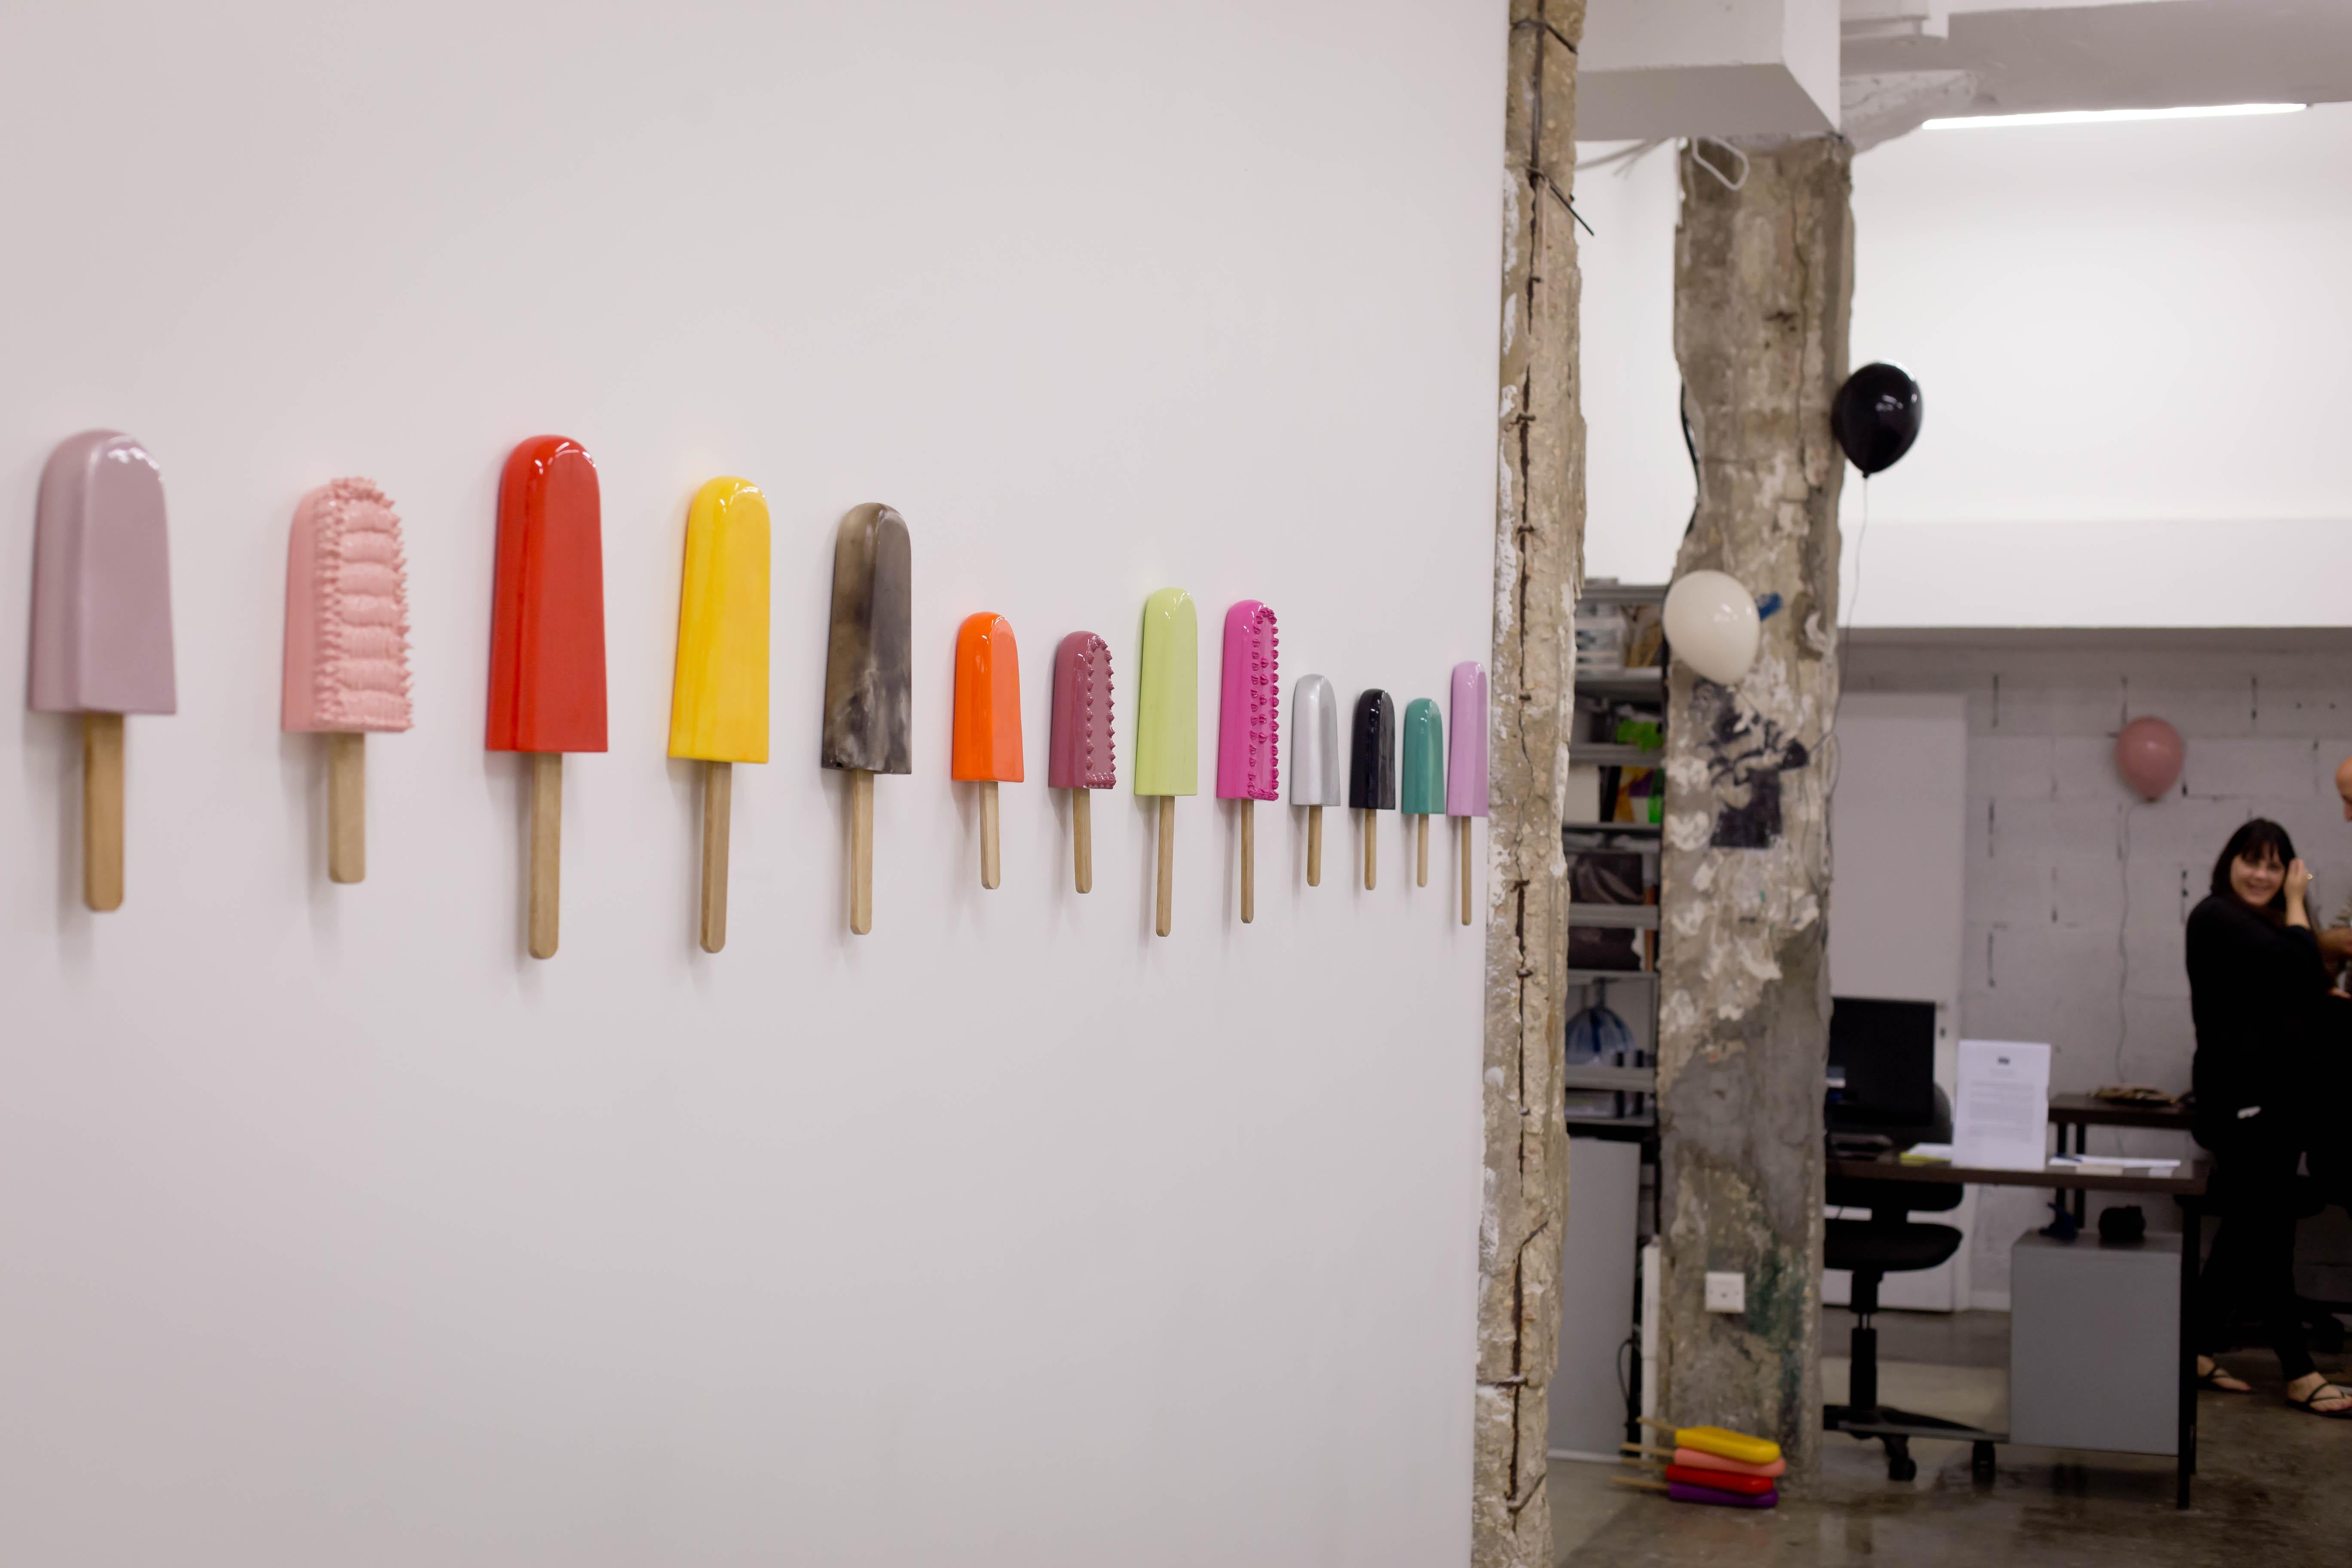 set of 13 popsicles wall installation - 6 big popsicles and 7 small popsicles